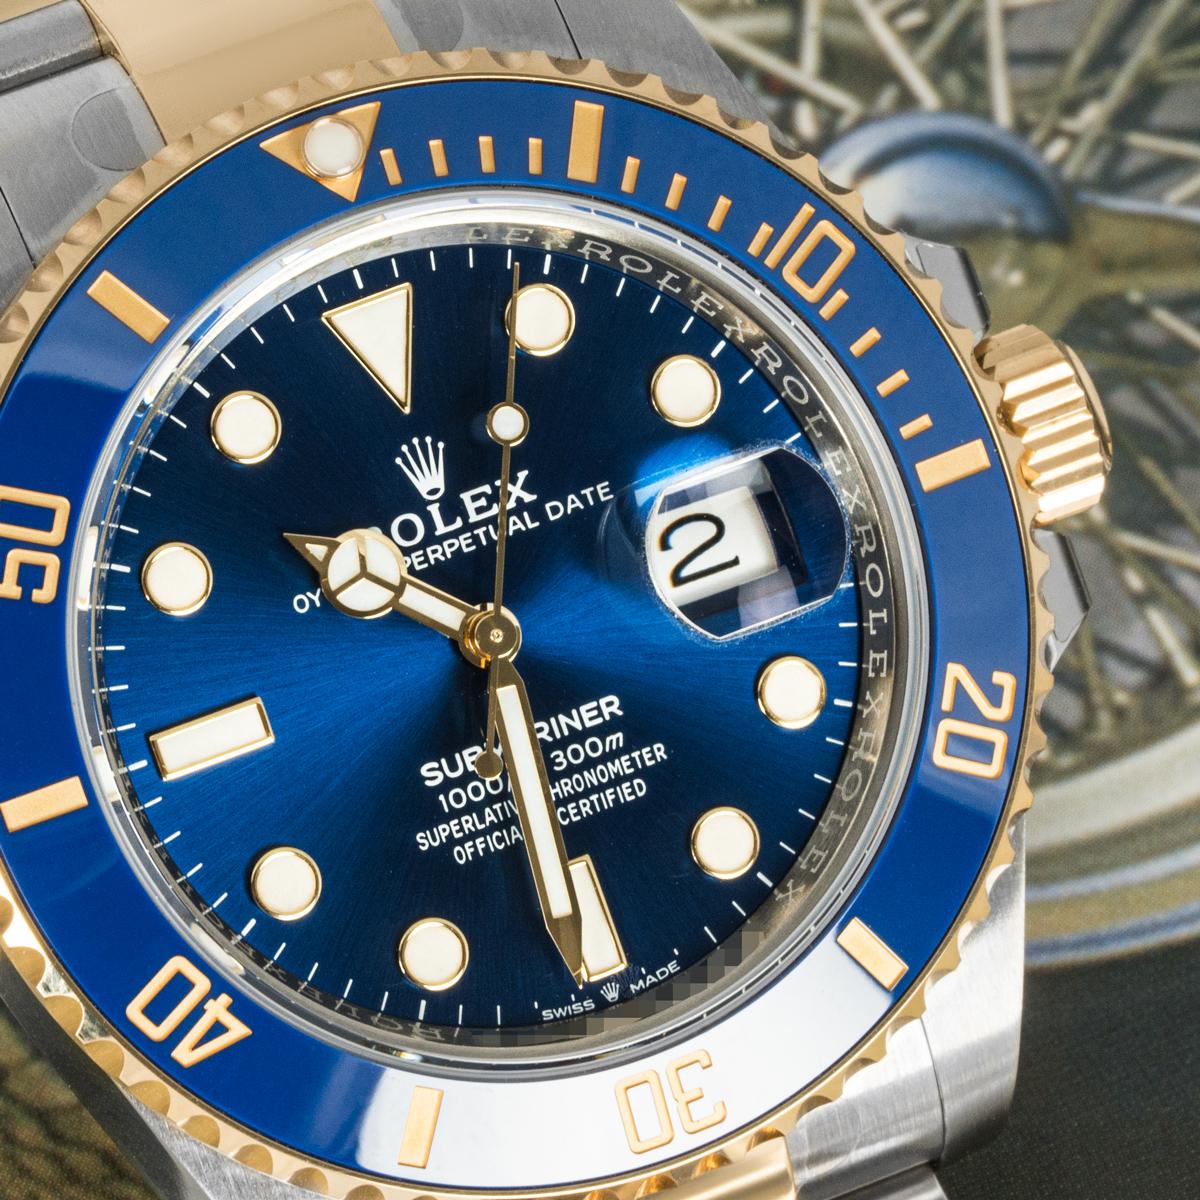 An unworn 41mm Submariner Date in Oystersteel and yellow gold by Rolex. Featuring a royal blue dial with luminescent hour markers. The yellow gold uni-directional rotatable bezel has a blue ceramic insert, with 60-minute graduations coated in